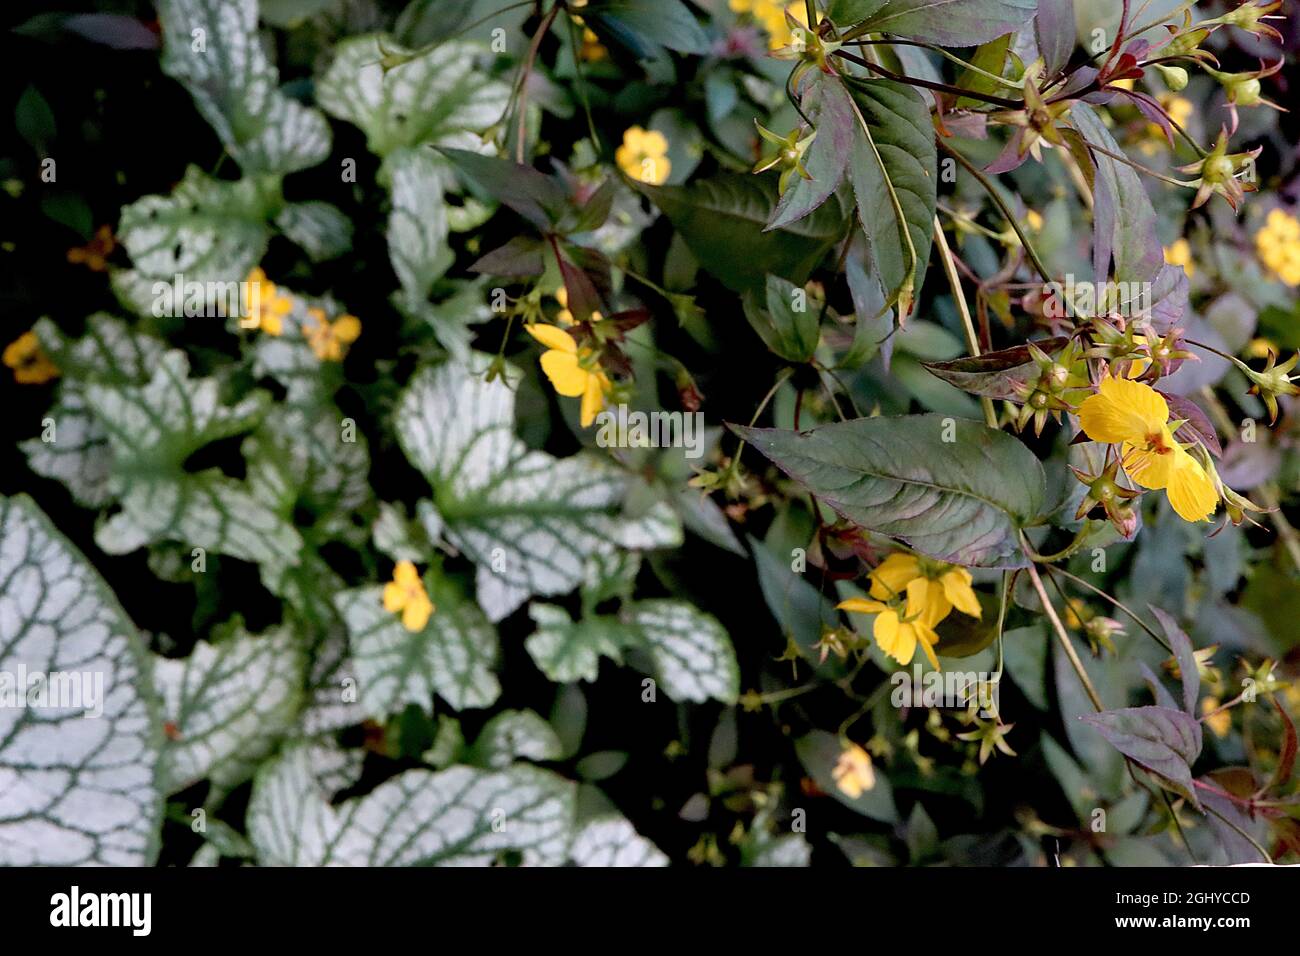 Lysimachia ciliata Firecracker fringed loosestrife Firecracker – yellow flowers with fringed petals and purple green bronze leaves,  August, England, Stock Photo